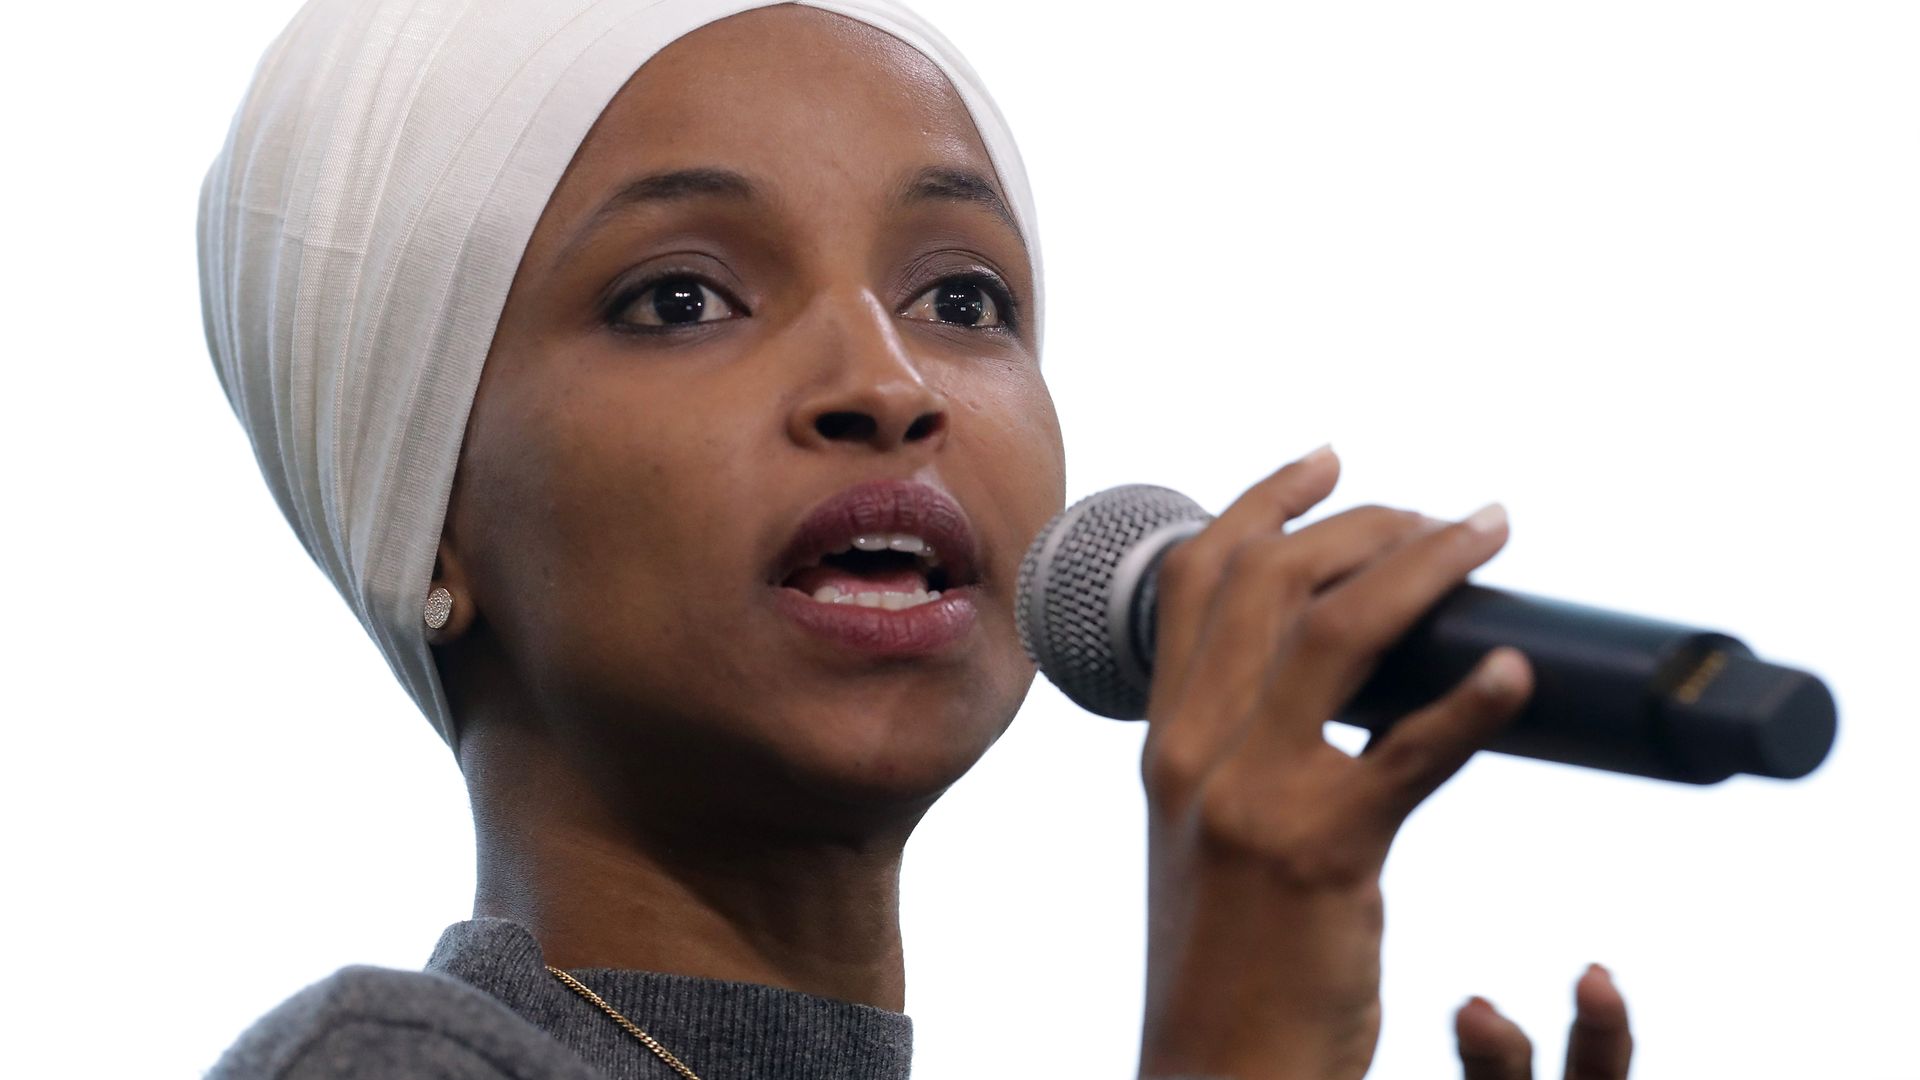 Rep. Ilhan Omar (D-MN) participates in a panel discussion during the Muslim Collective For Equitable Democracy Conference and Presidential Forum